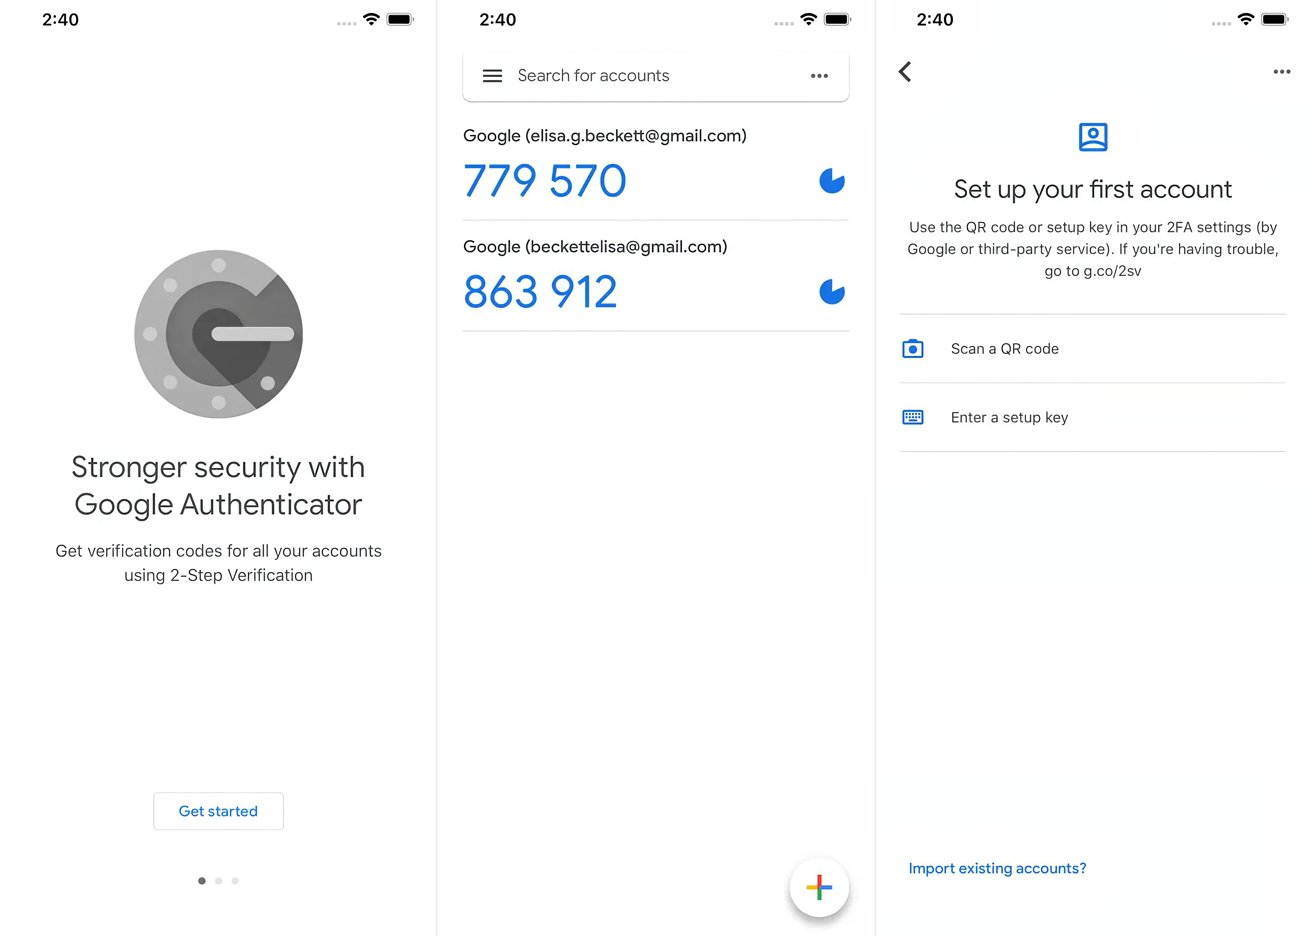 Google Authenticator is an app that provides 2FA codes on your iPhone. 